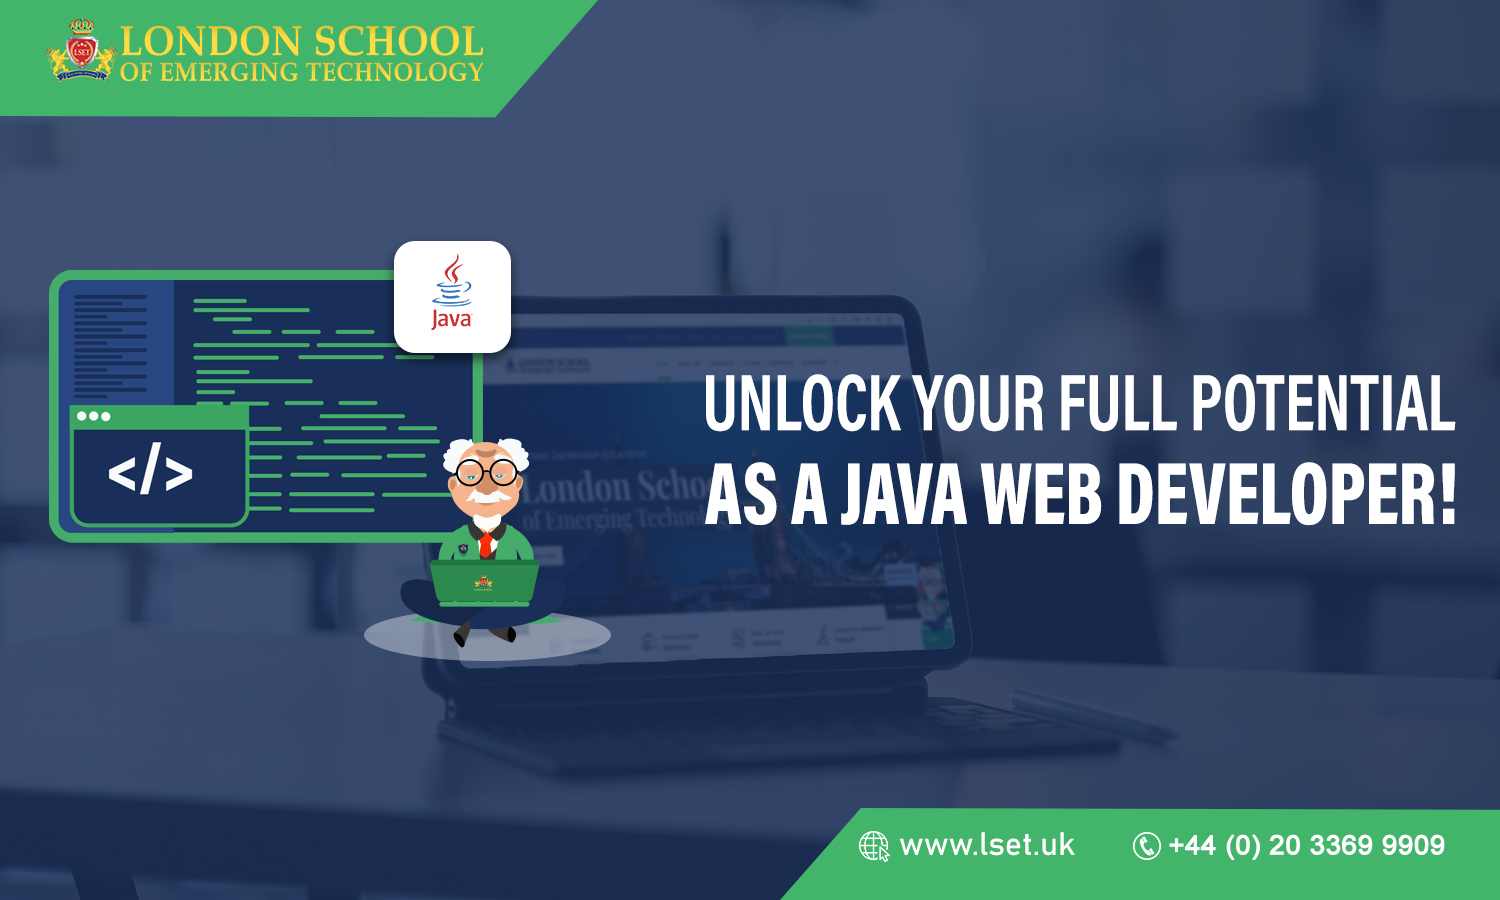 Unlock Your Full Potential as a Java Web Developer!